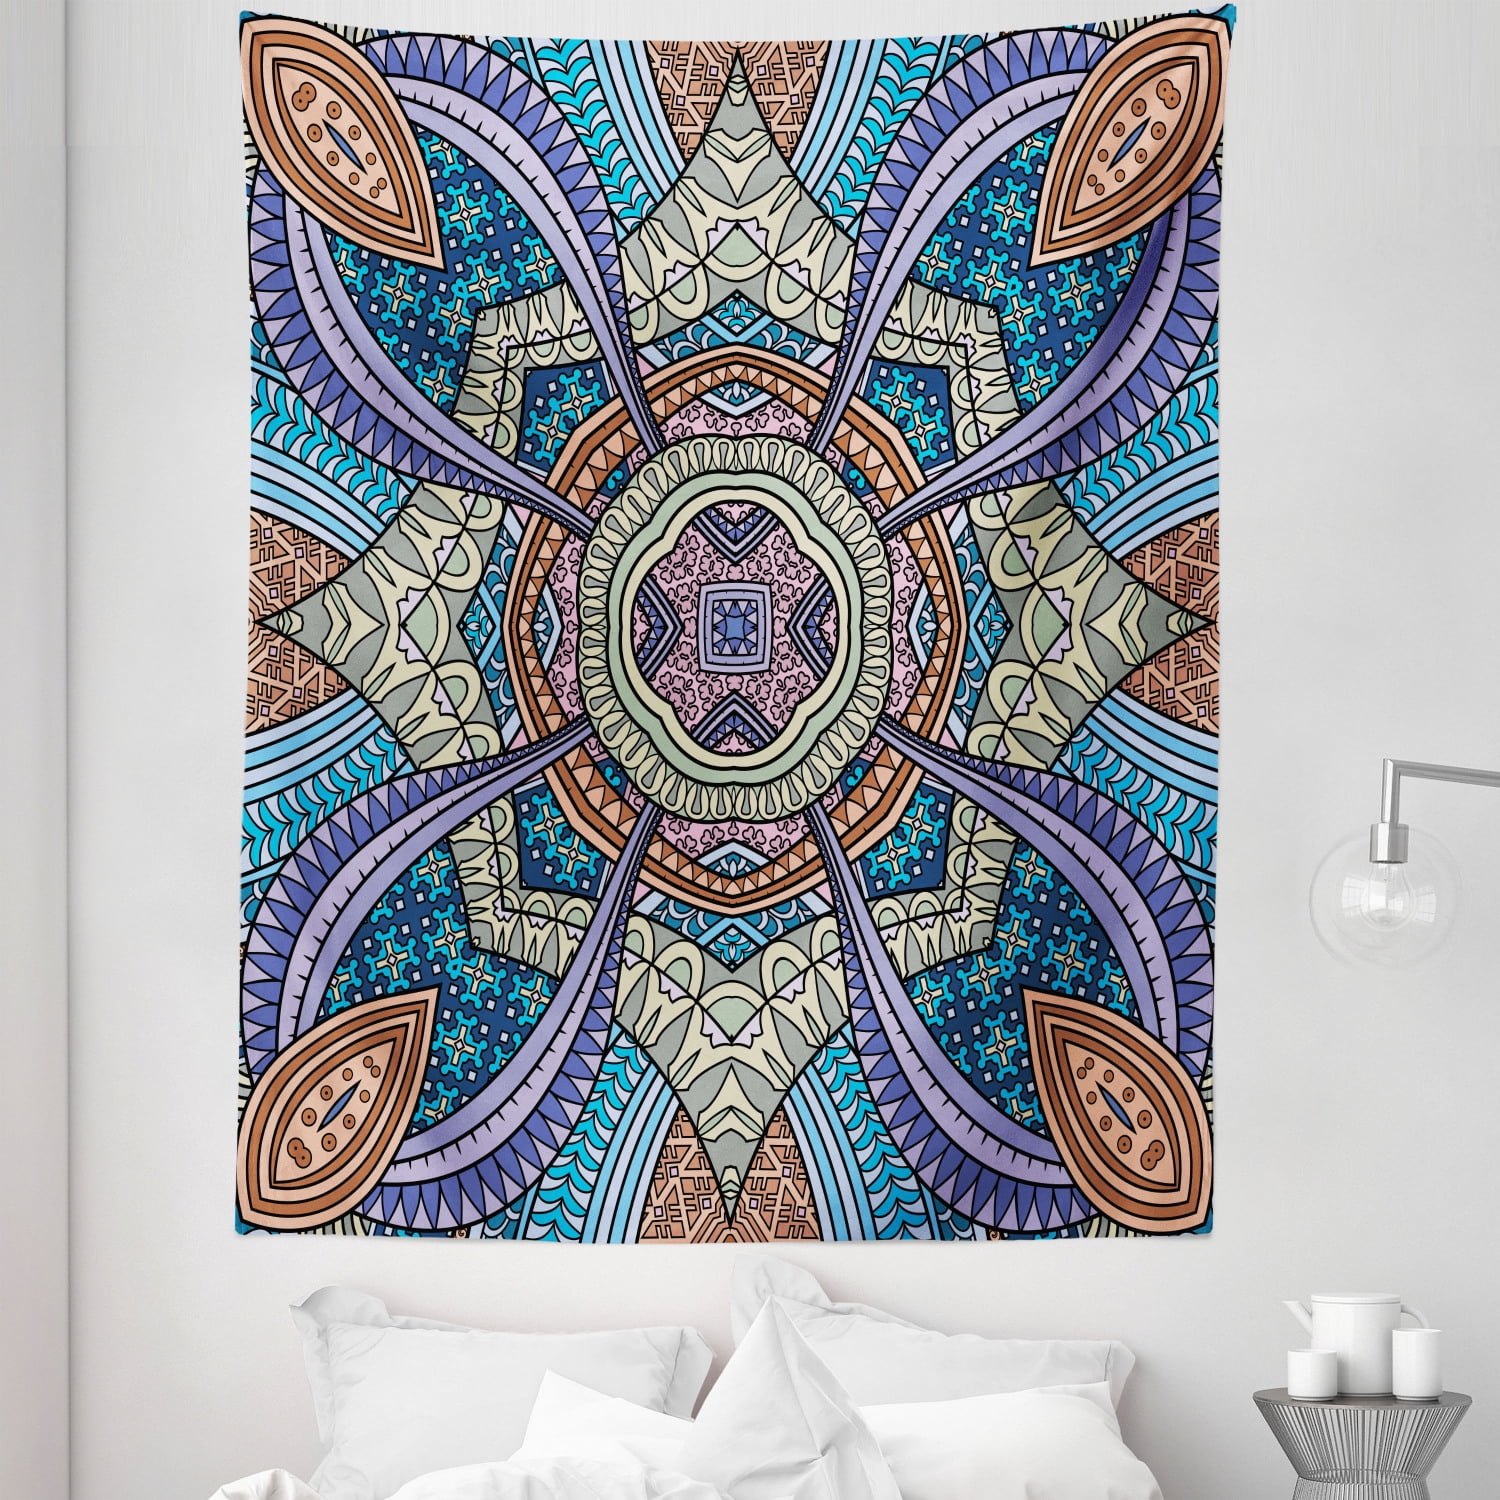 Tulpen Alabama schors Mandala Tapestry, Abstract Look Ethnic Bohemian Ornaments Leaves and  Oriental Shapes Illustration, Fabric Wall Hanging Decor for Bedroom Living  Room Dorm, 5 Sizes, Multicolor, by Ambesonne - Walmart.com